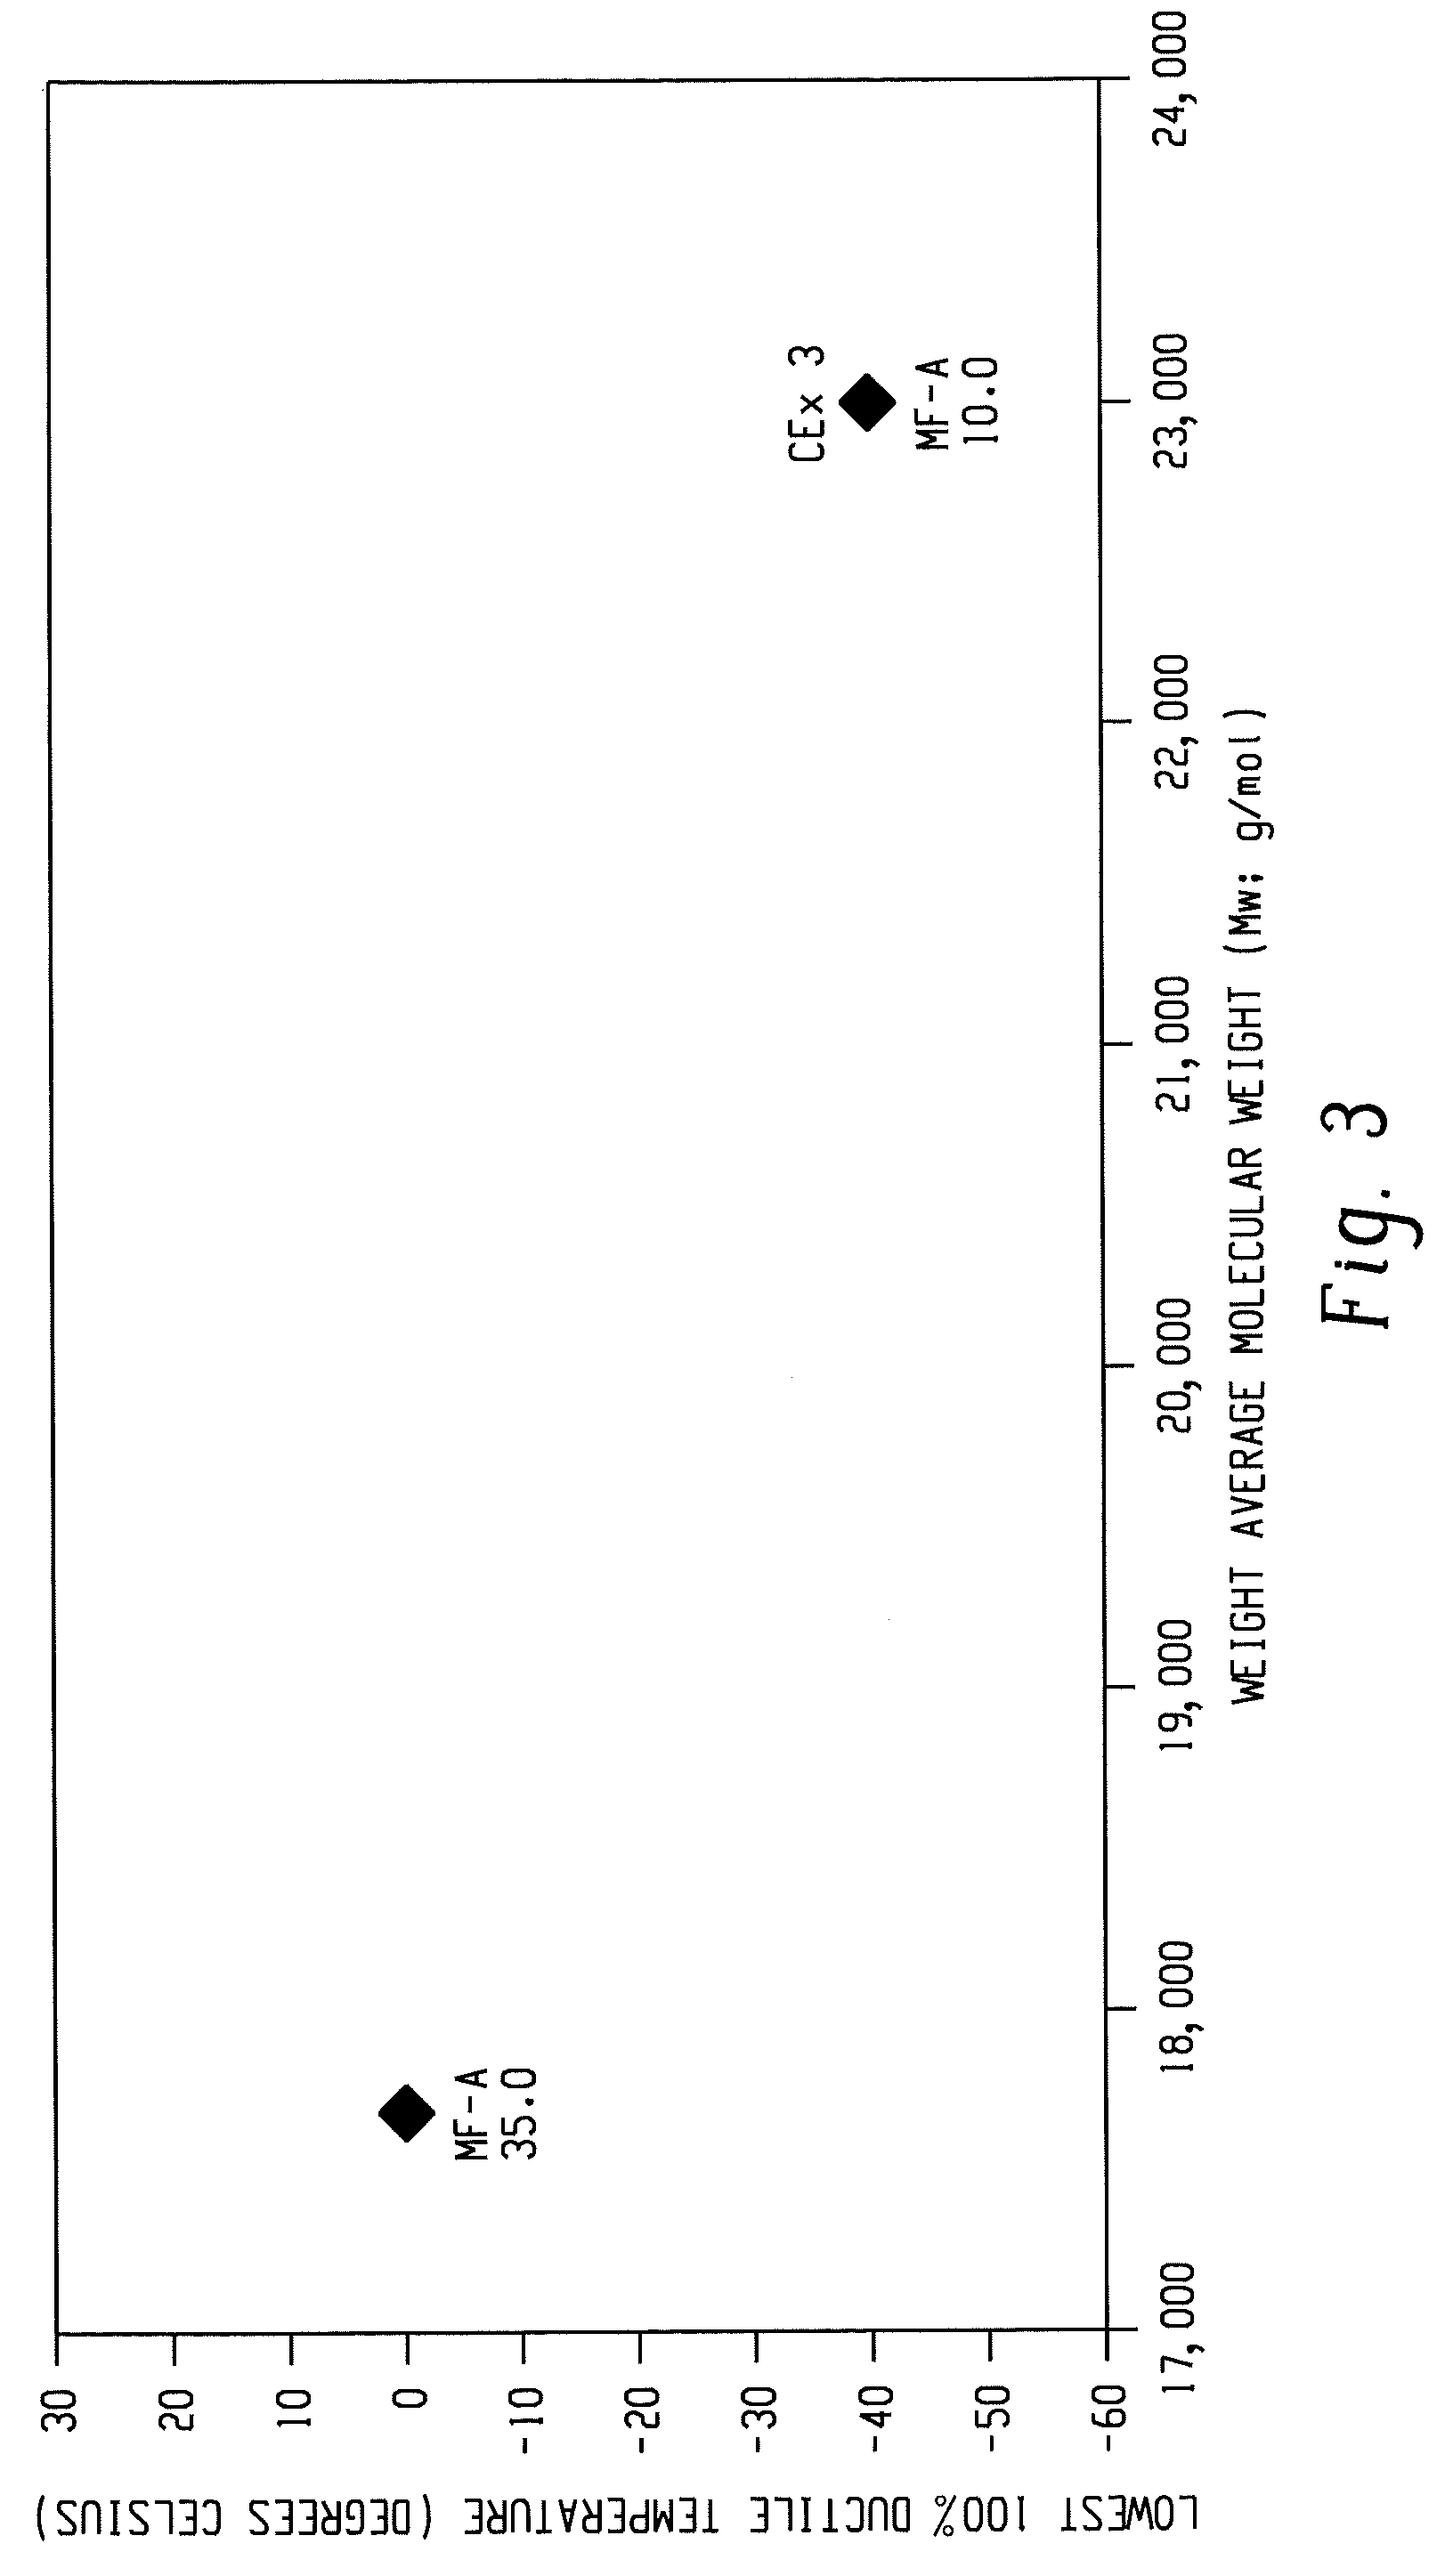 Transparent thermoplastic compositions having high flow and ductiliy, and articles prepared therefrom